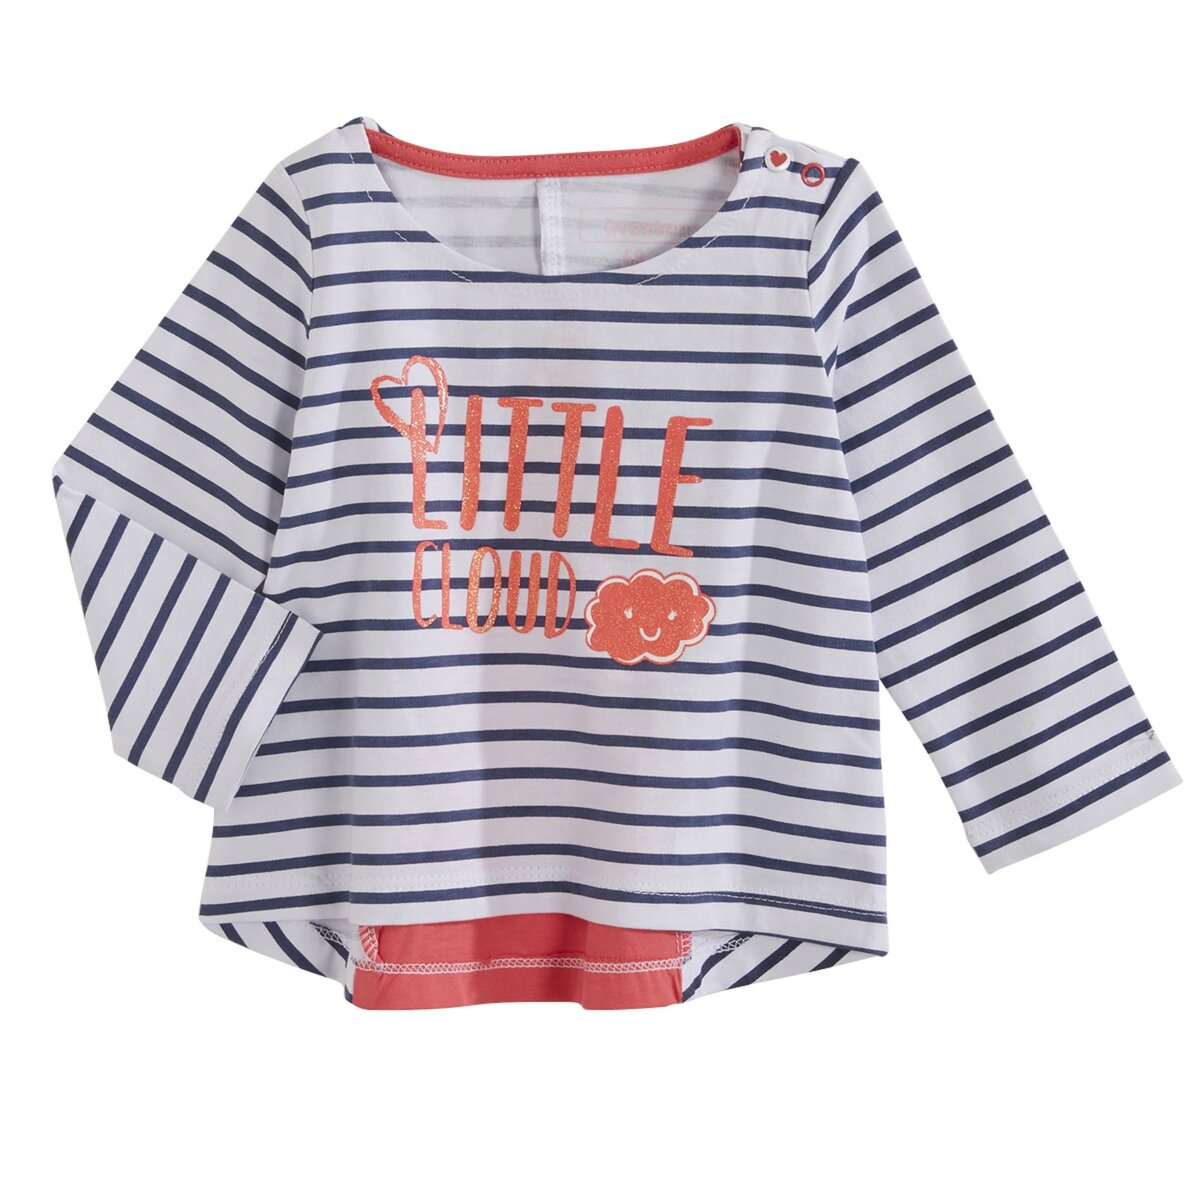 IN EXTENSO Tee-shirt rayé manches longues bébé fille